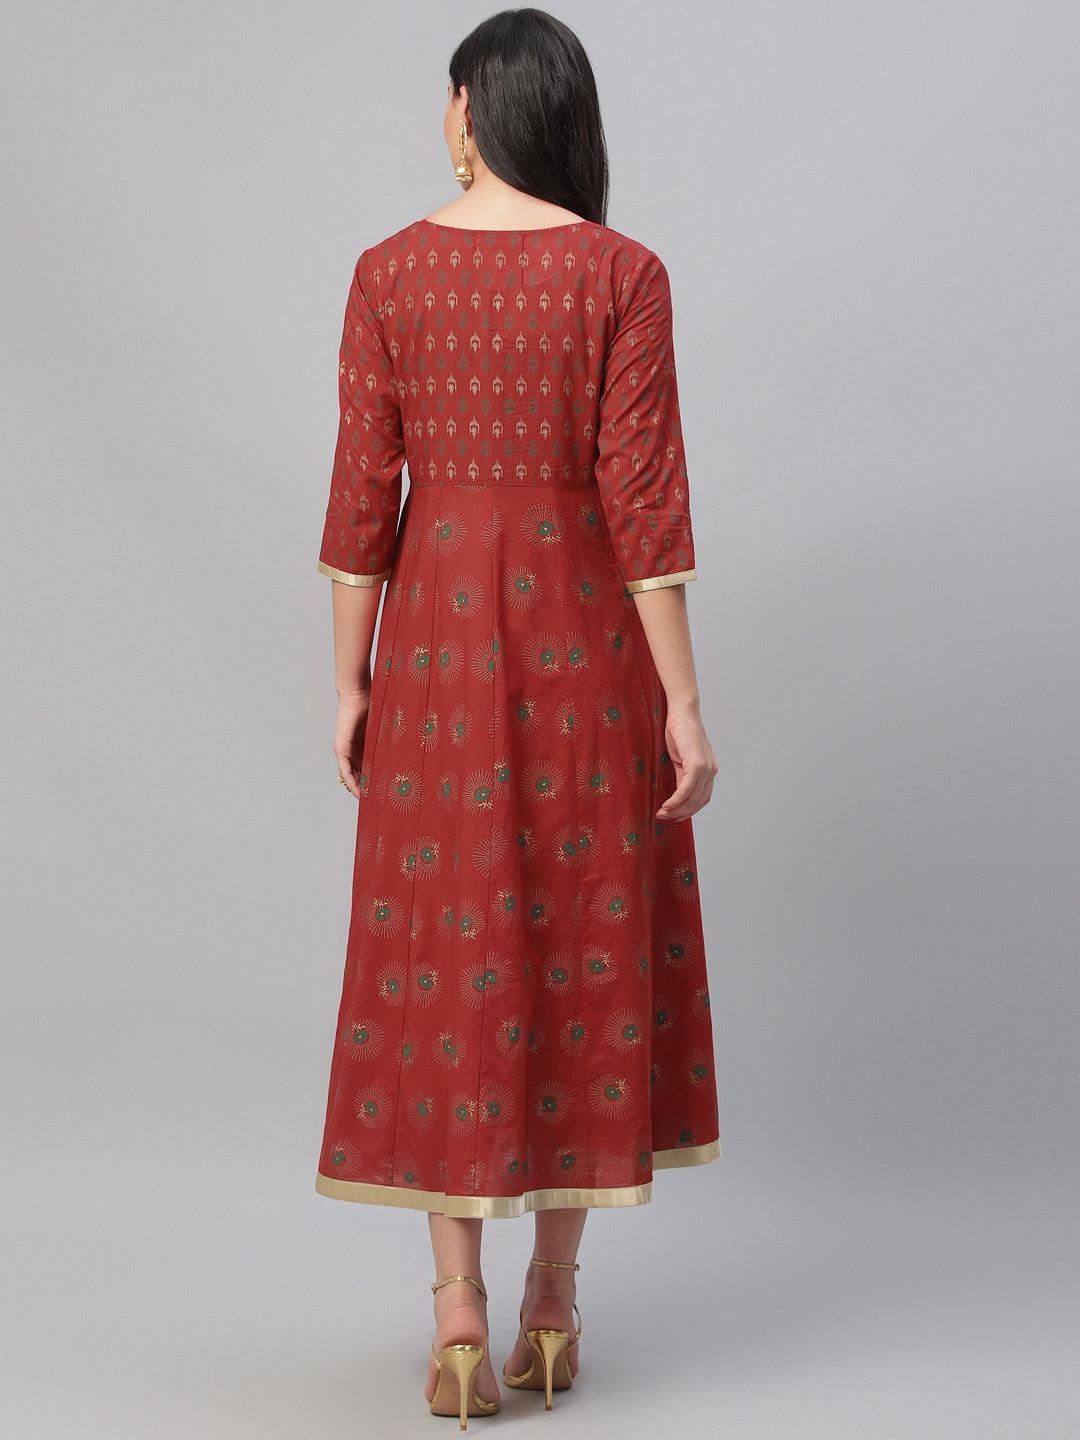 Red Printed Cotton Dress - Libas